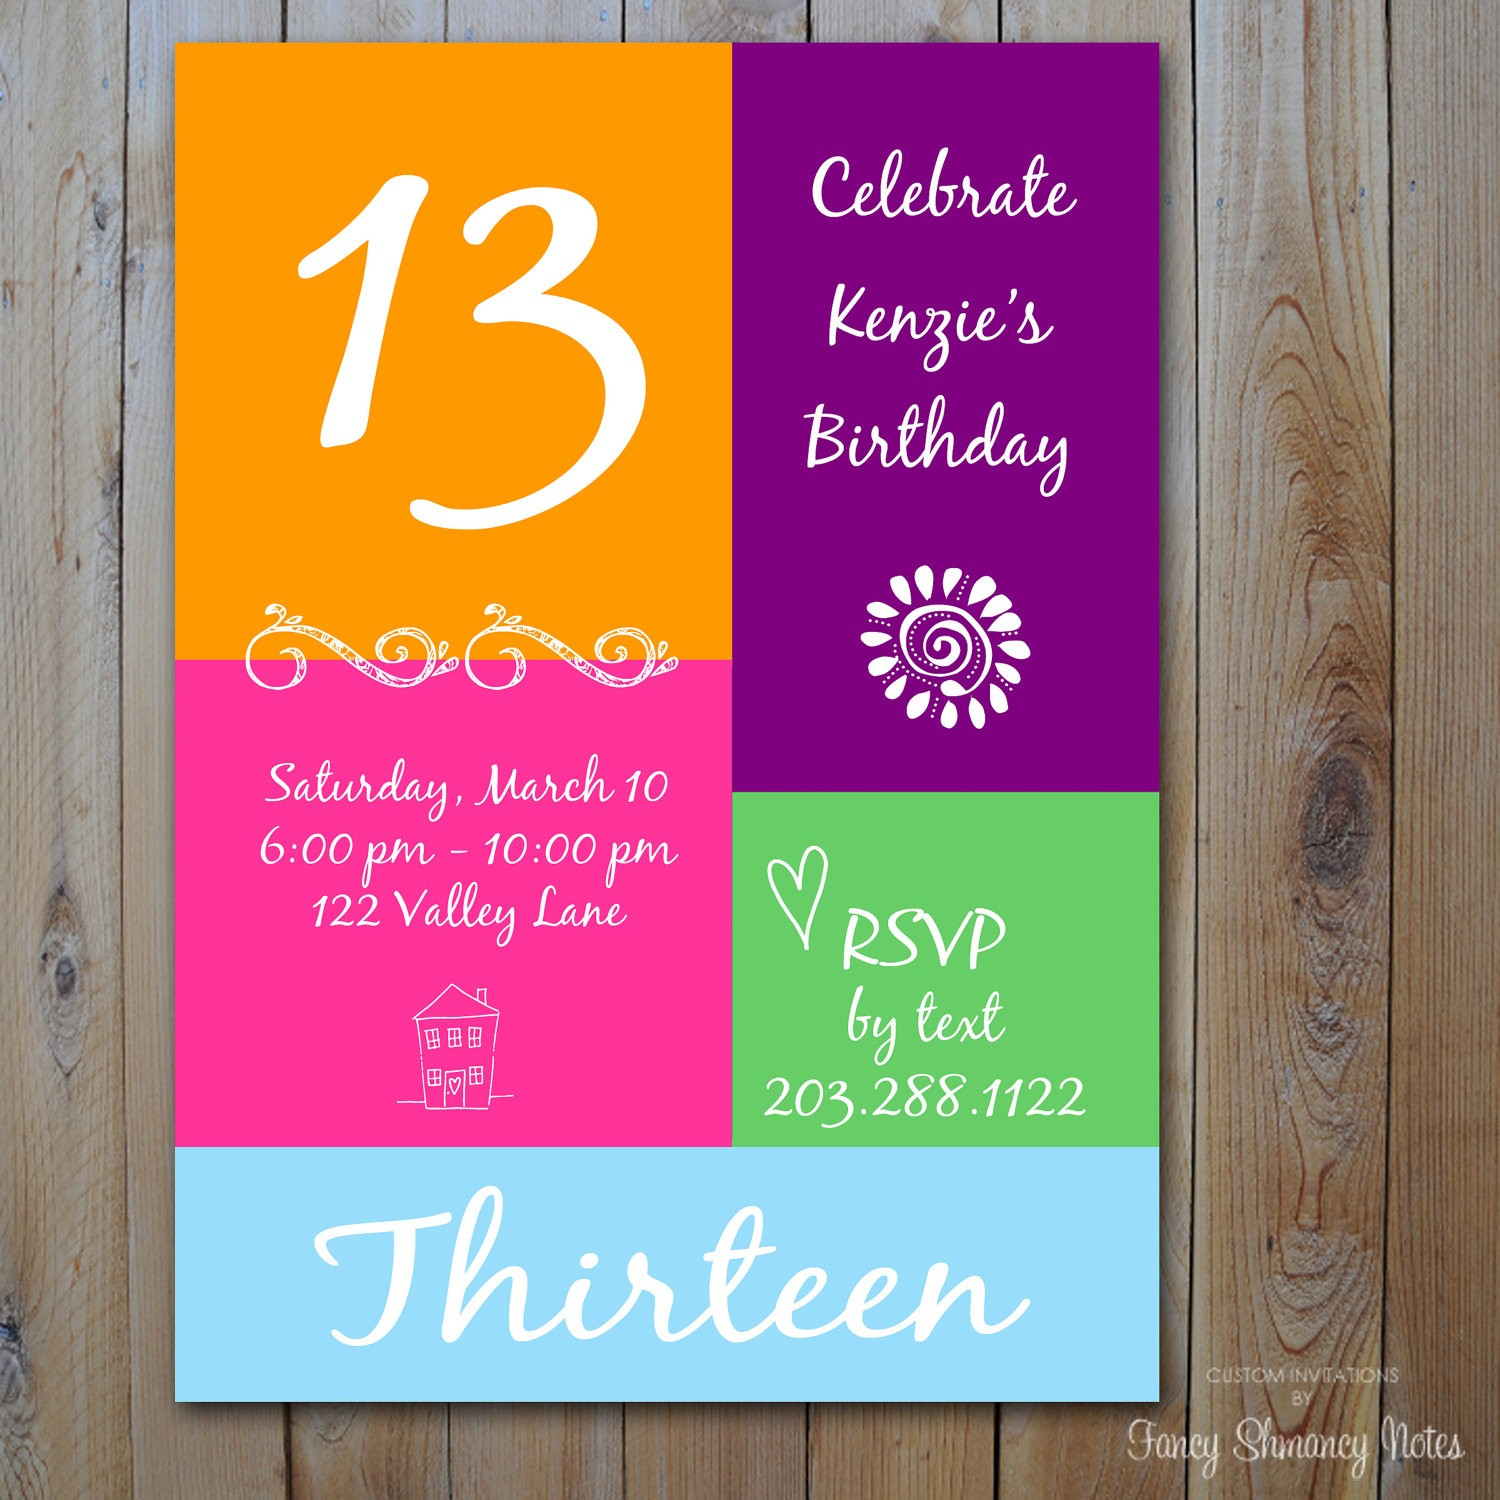 13Th Birthday Card Ideas Party Invitations Cards 13th Birthday Party Invitations Boys 13th